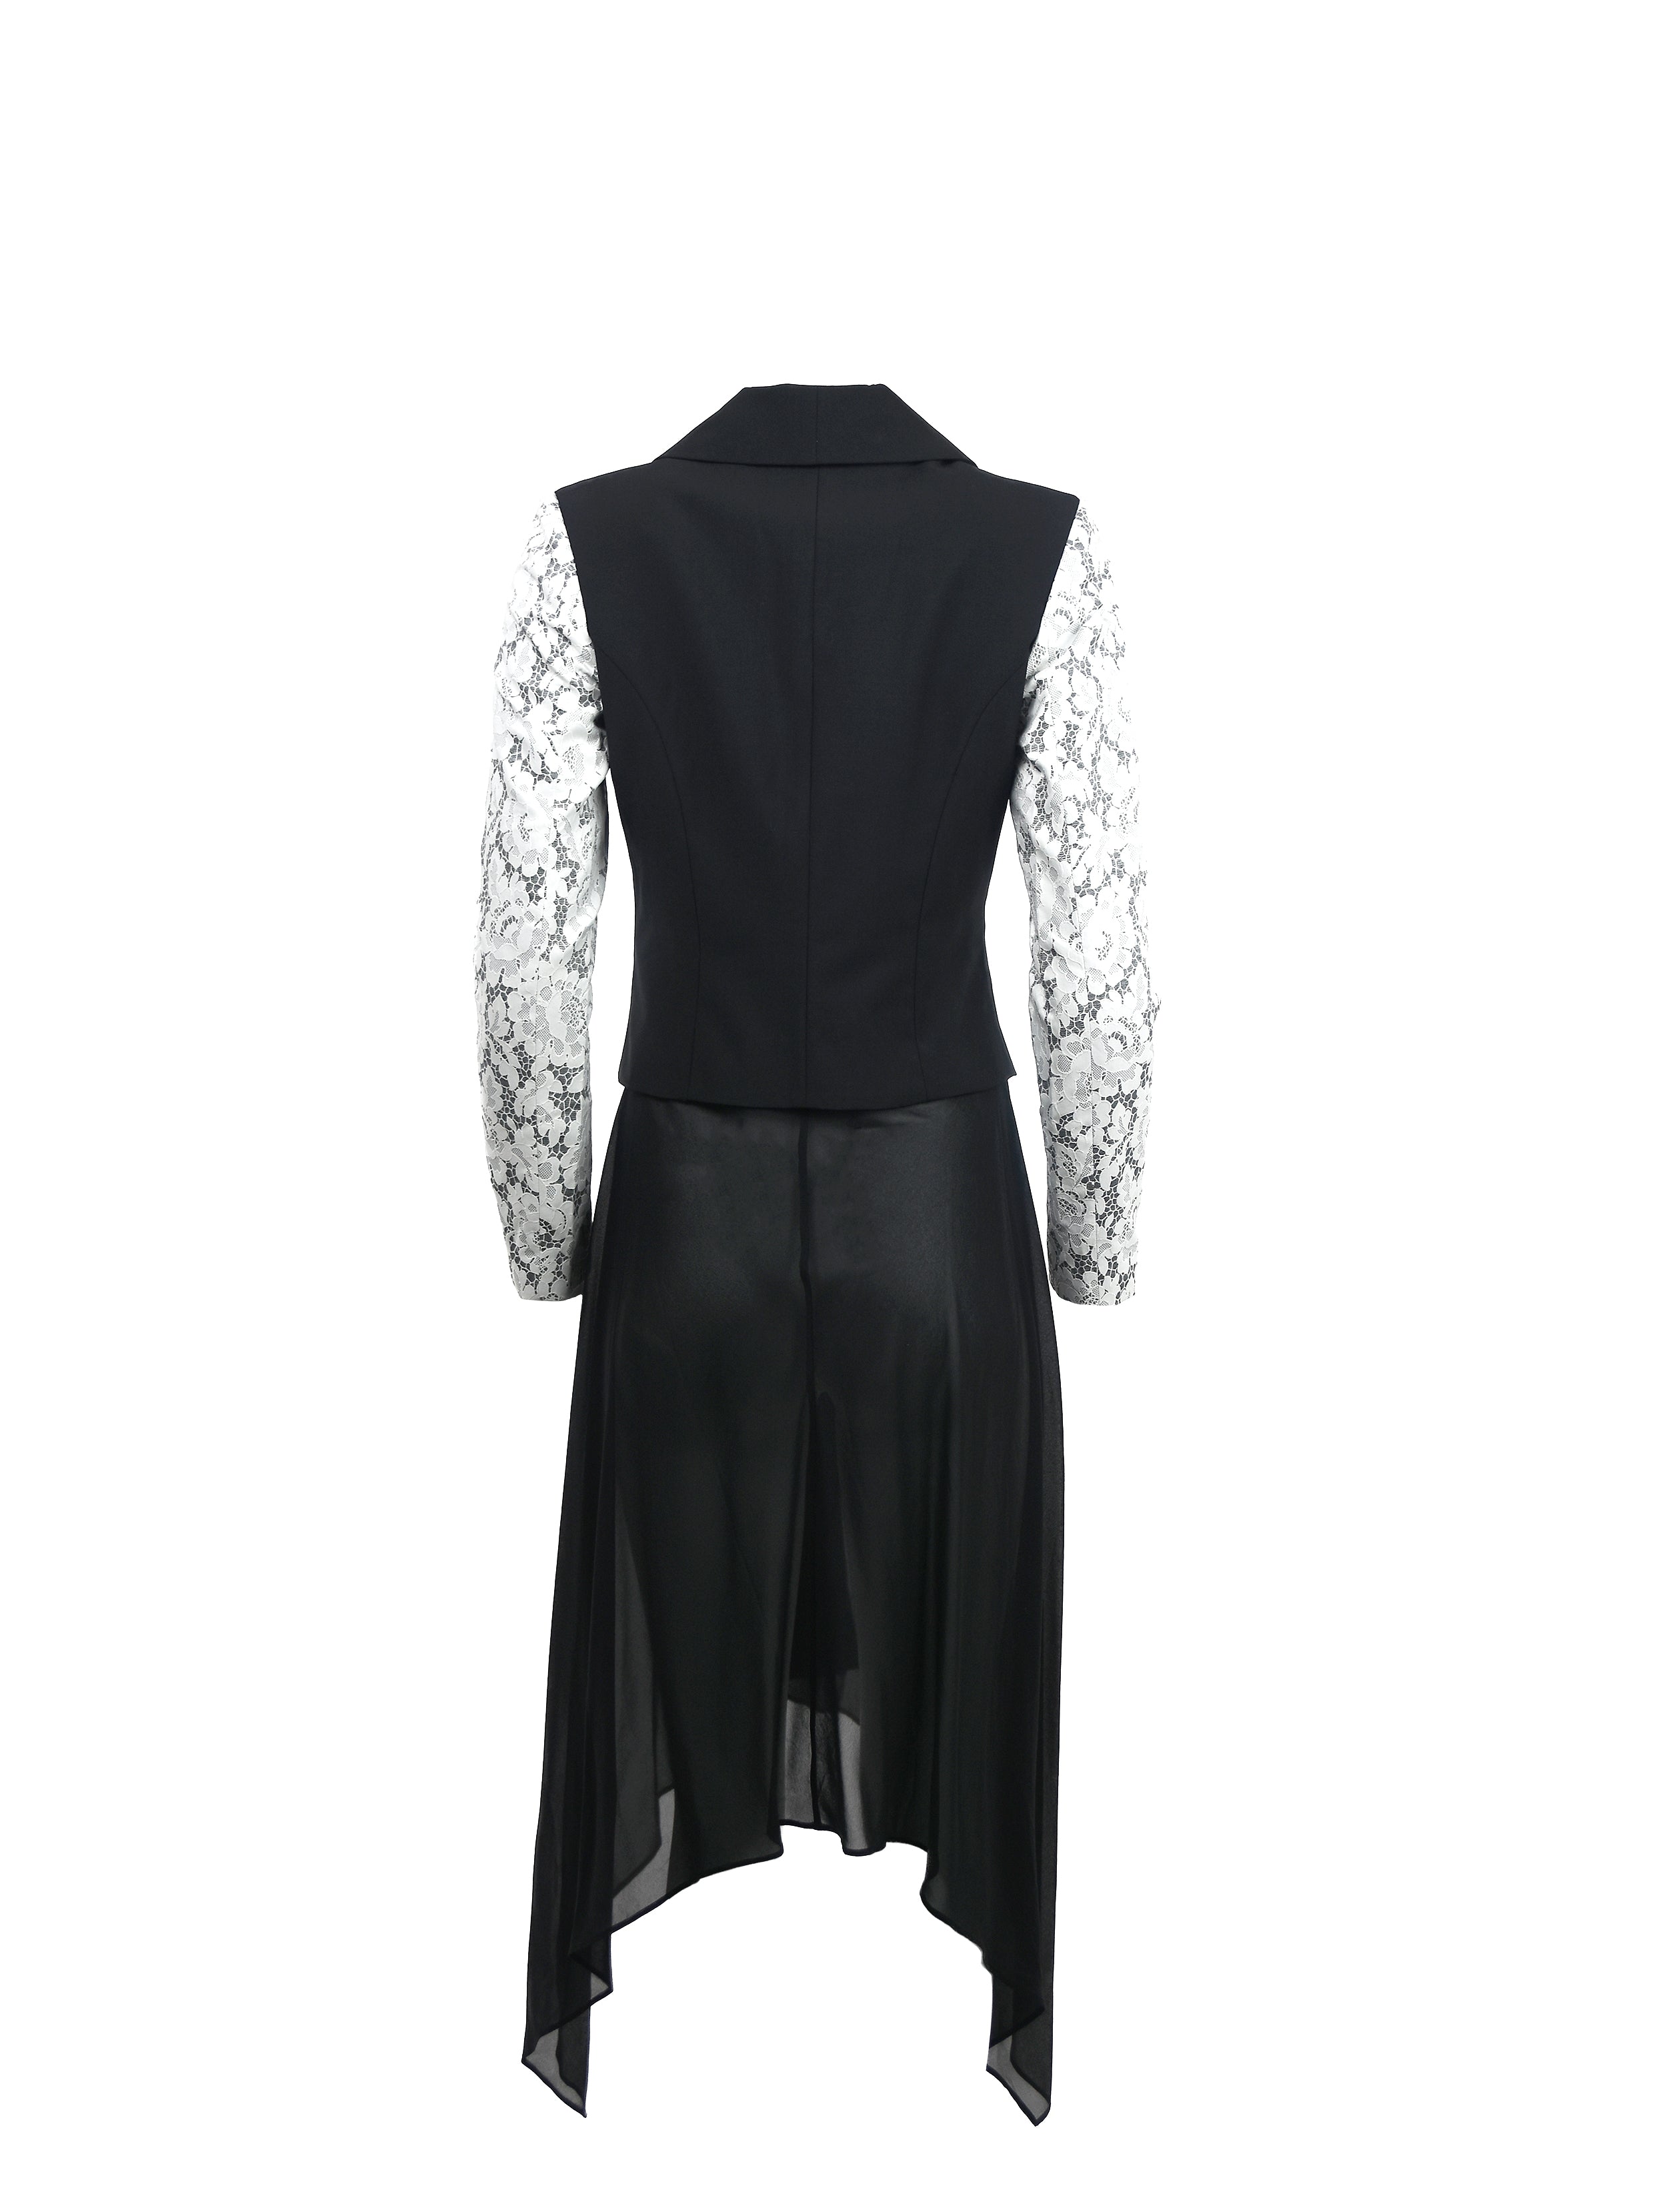 WOMENS BLACK SUIT JACKET WITH LACE SLEEVE APPLIQUE